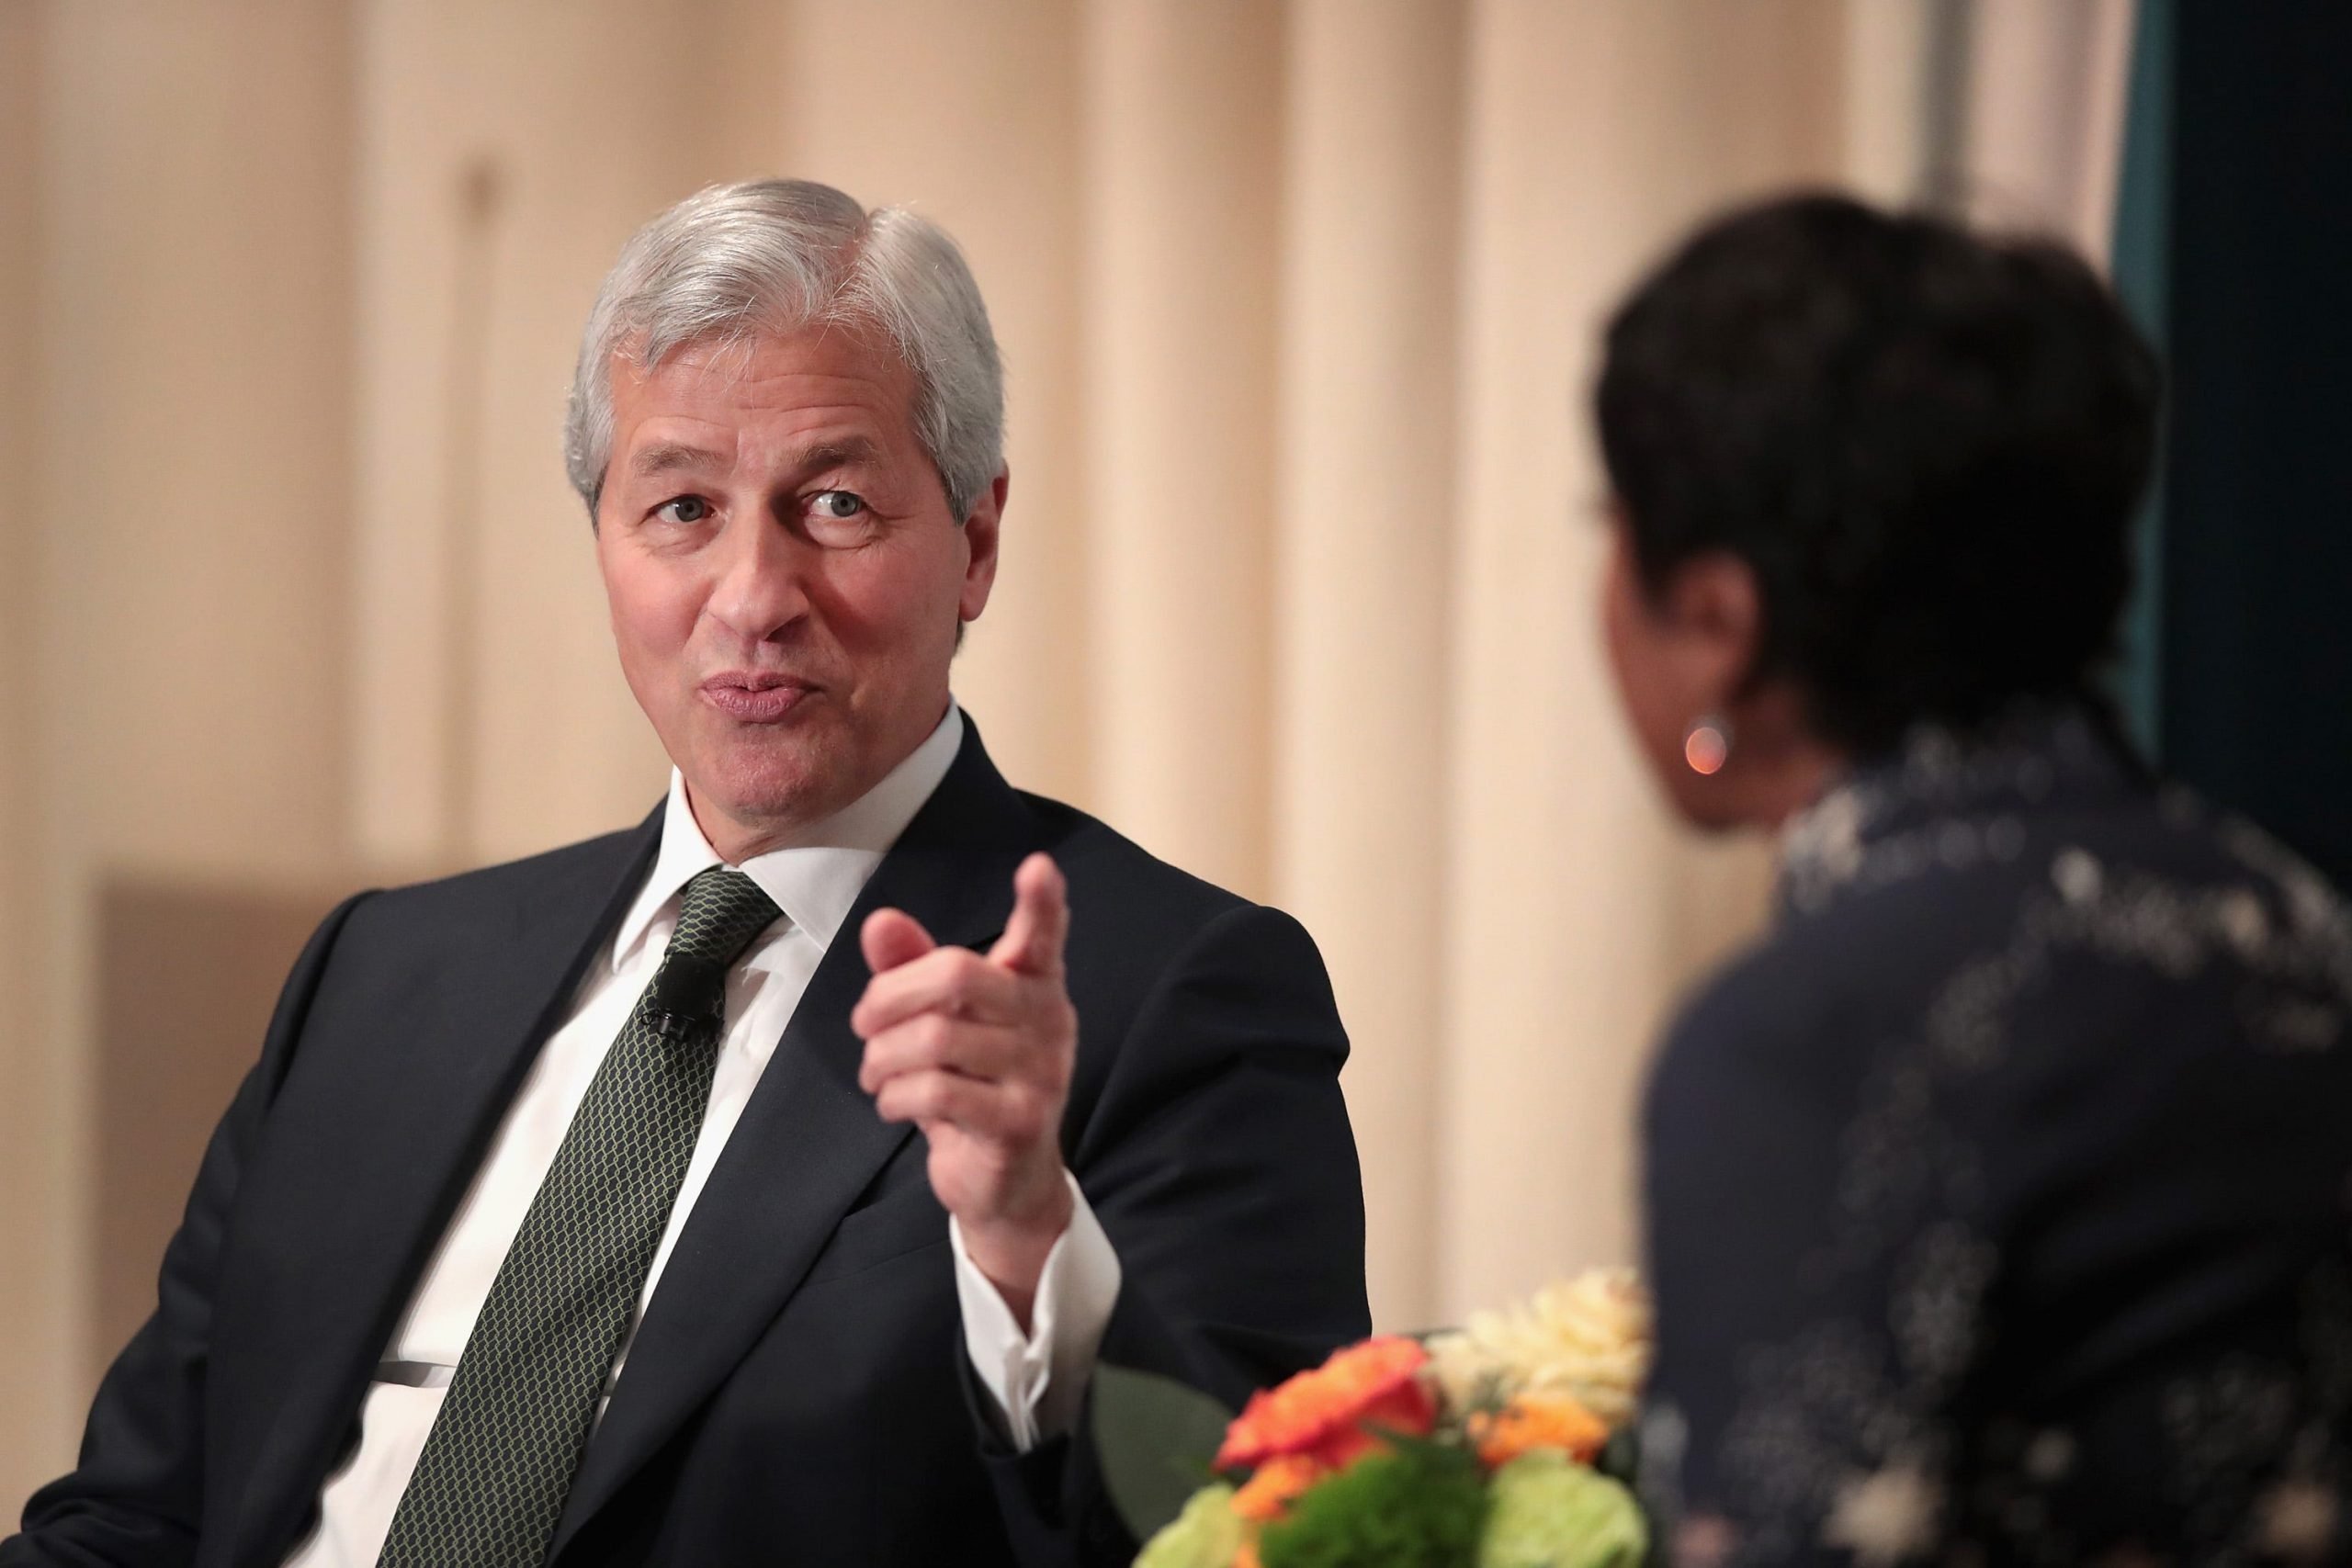 Jamie Dimon, Chairman and CEO of JPMorgan Chase & Co, fields questions from Mellody Hobson, president of Ariel Investments, during a luncheon hosted by The Economic Club of Chicago on November 22, 2017 in Chicago, Illinois.